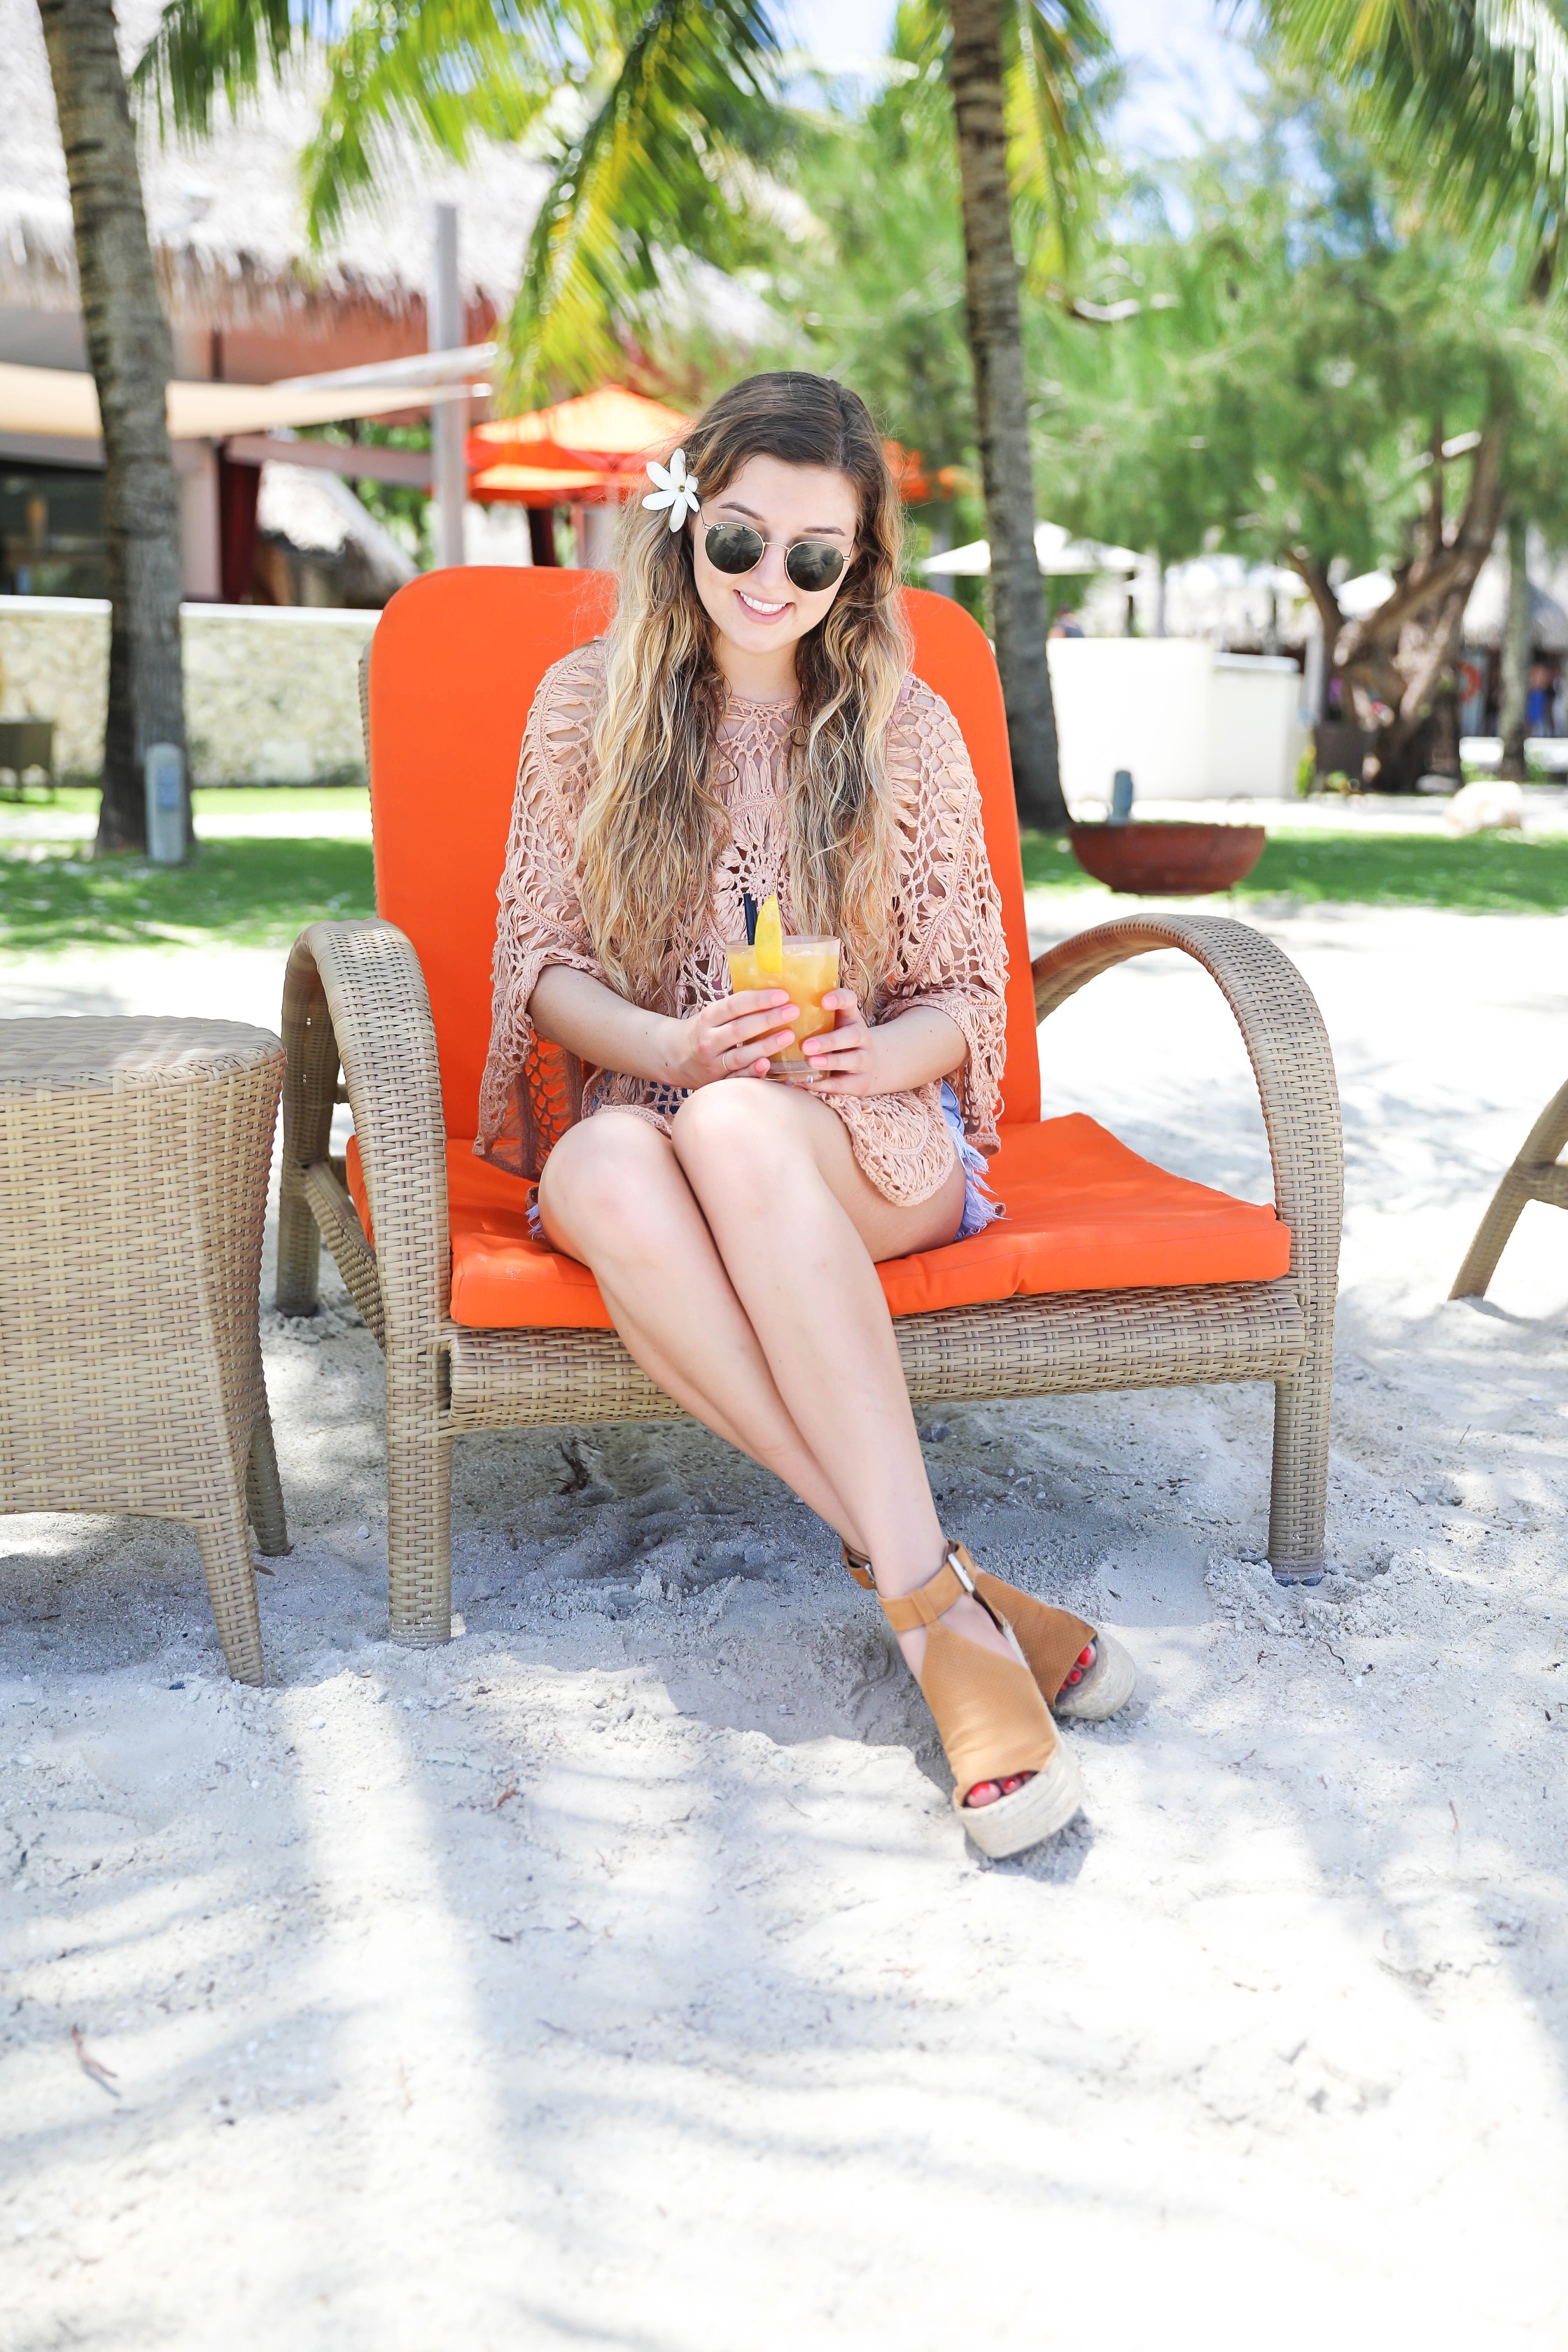 Crochet pool coverup for spring break and summer! Photos on orange pool chair! Bora Bora island vacation photos! Details on fashion blog daily dose of charm by lauren lindmark